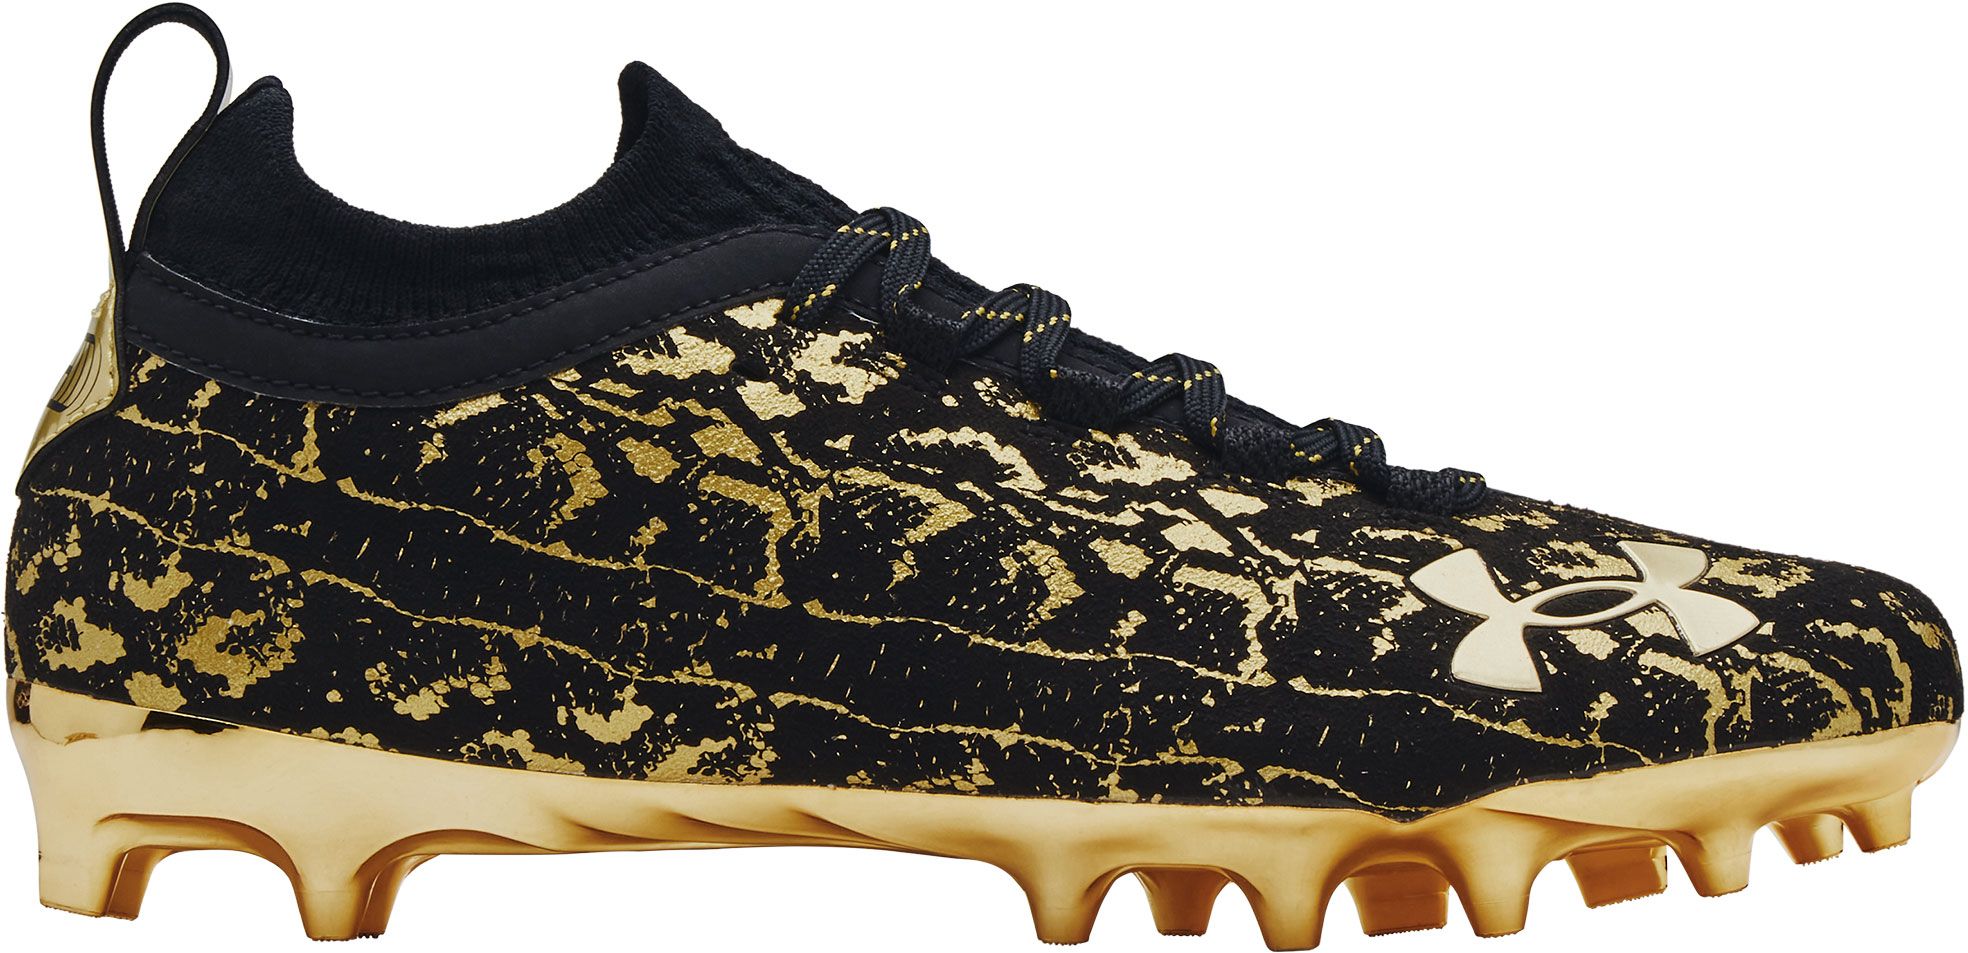 under armour high top football cleats